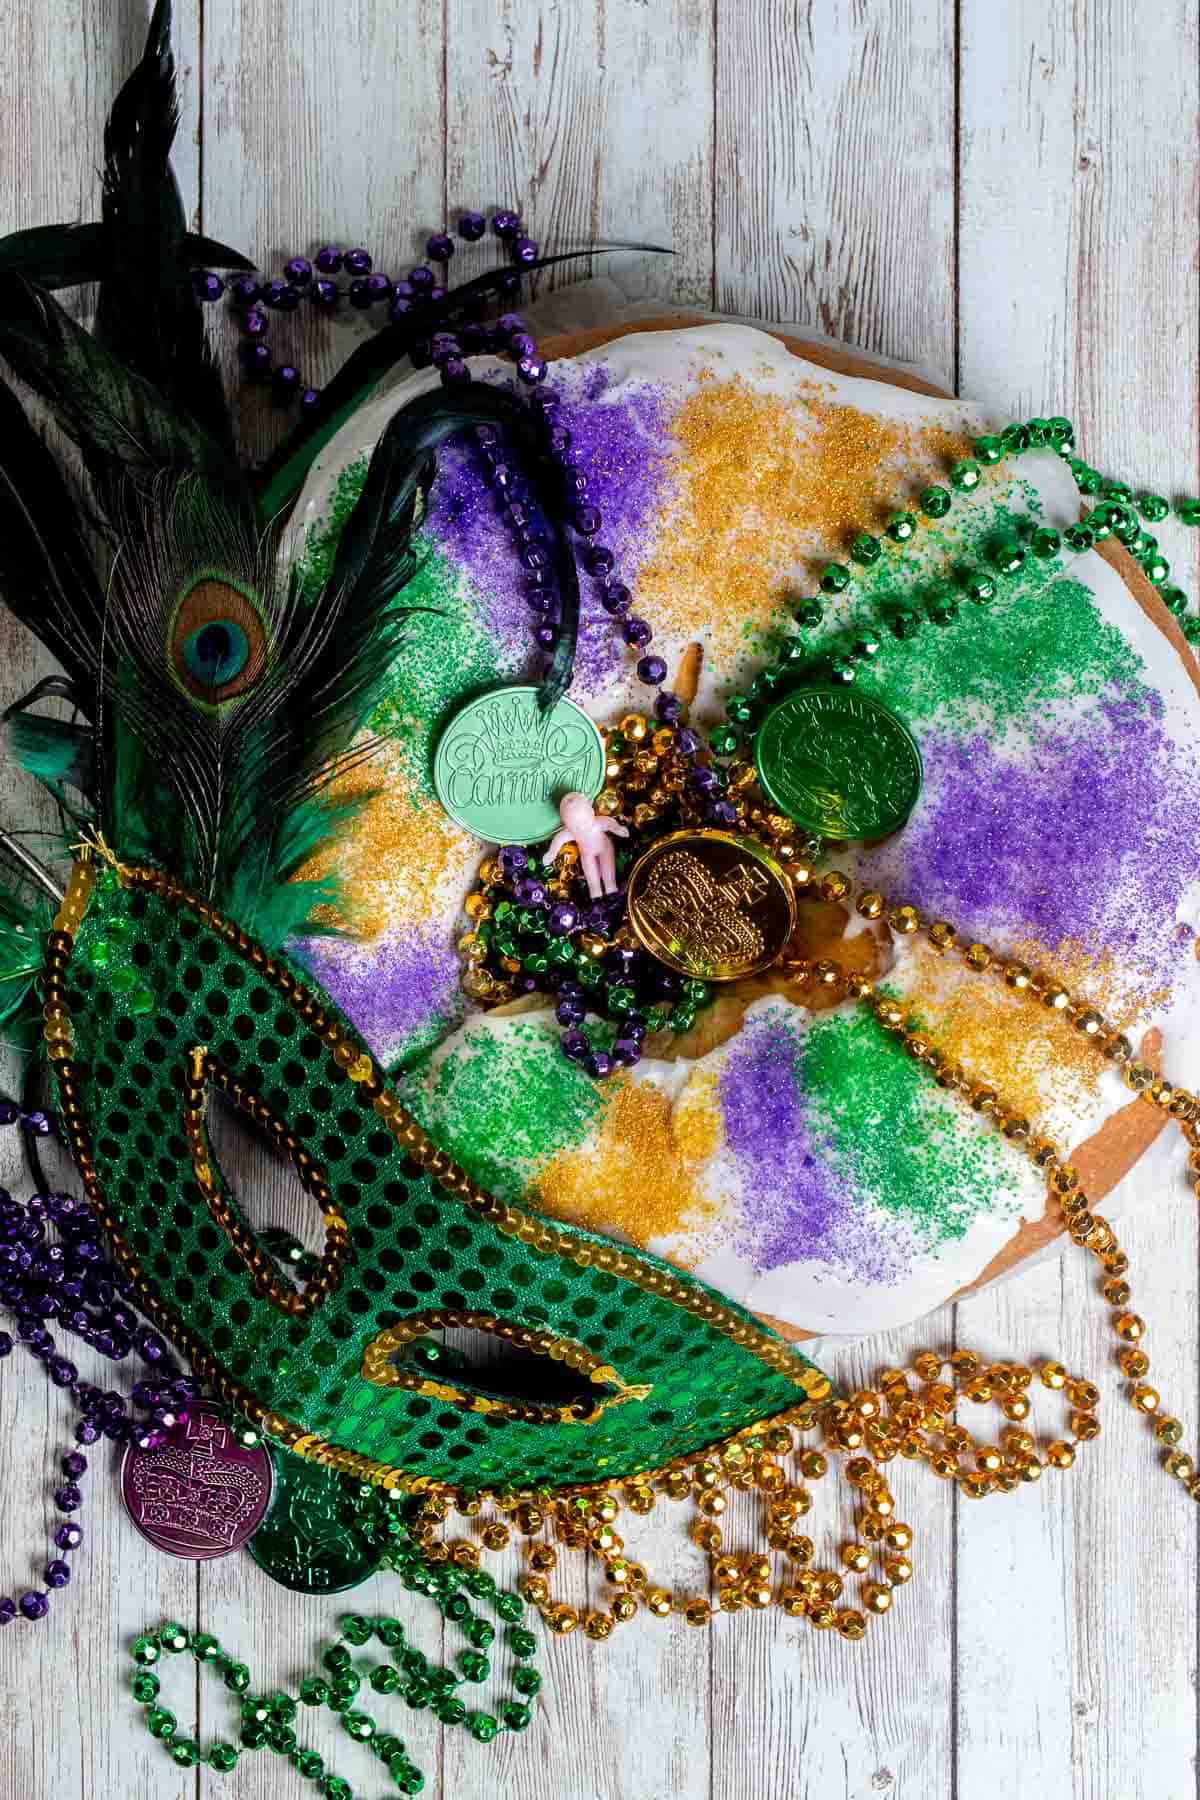 Overhead view of a traditional king cake with Mardi Gras beads and mask decorating it.